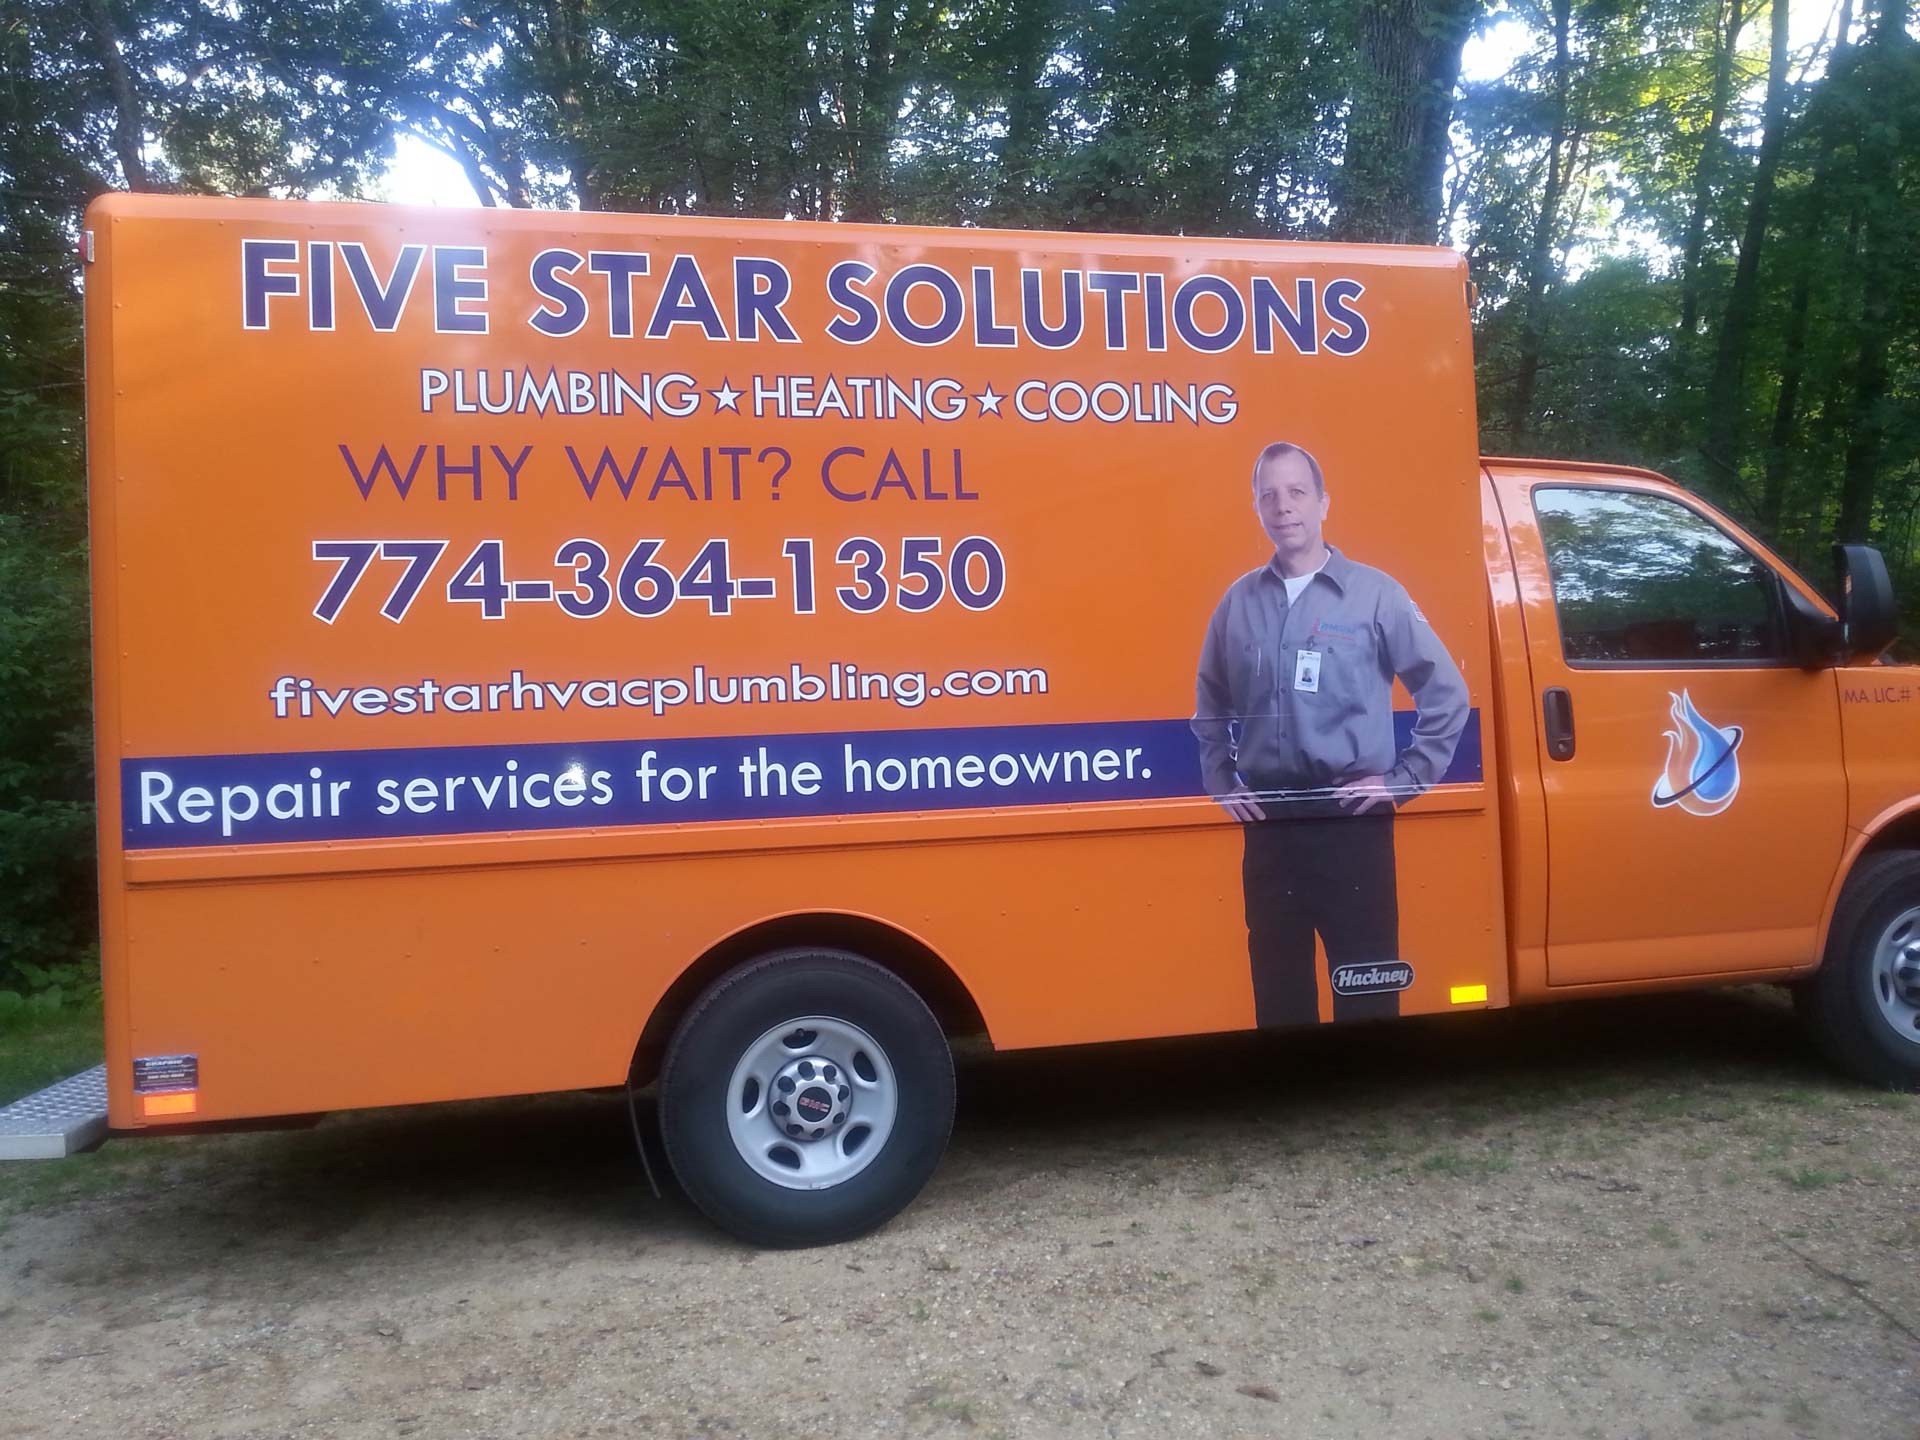 A photo of the Five Star Solutions truck